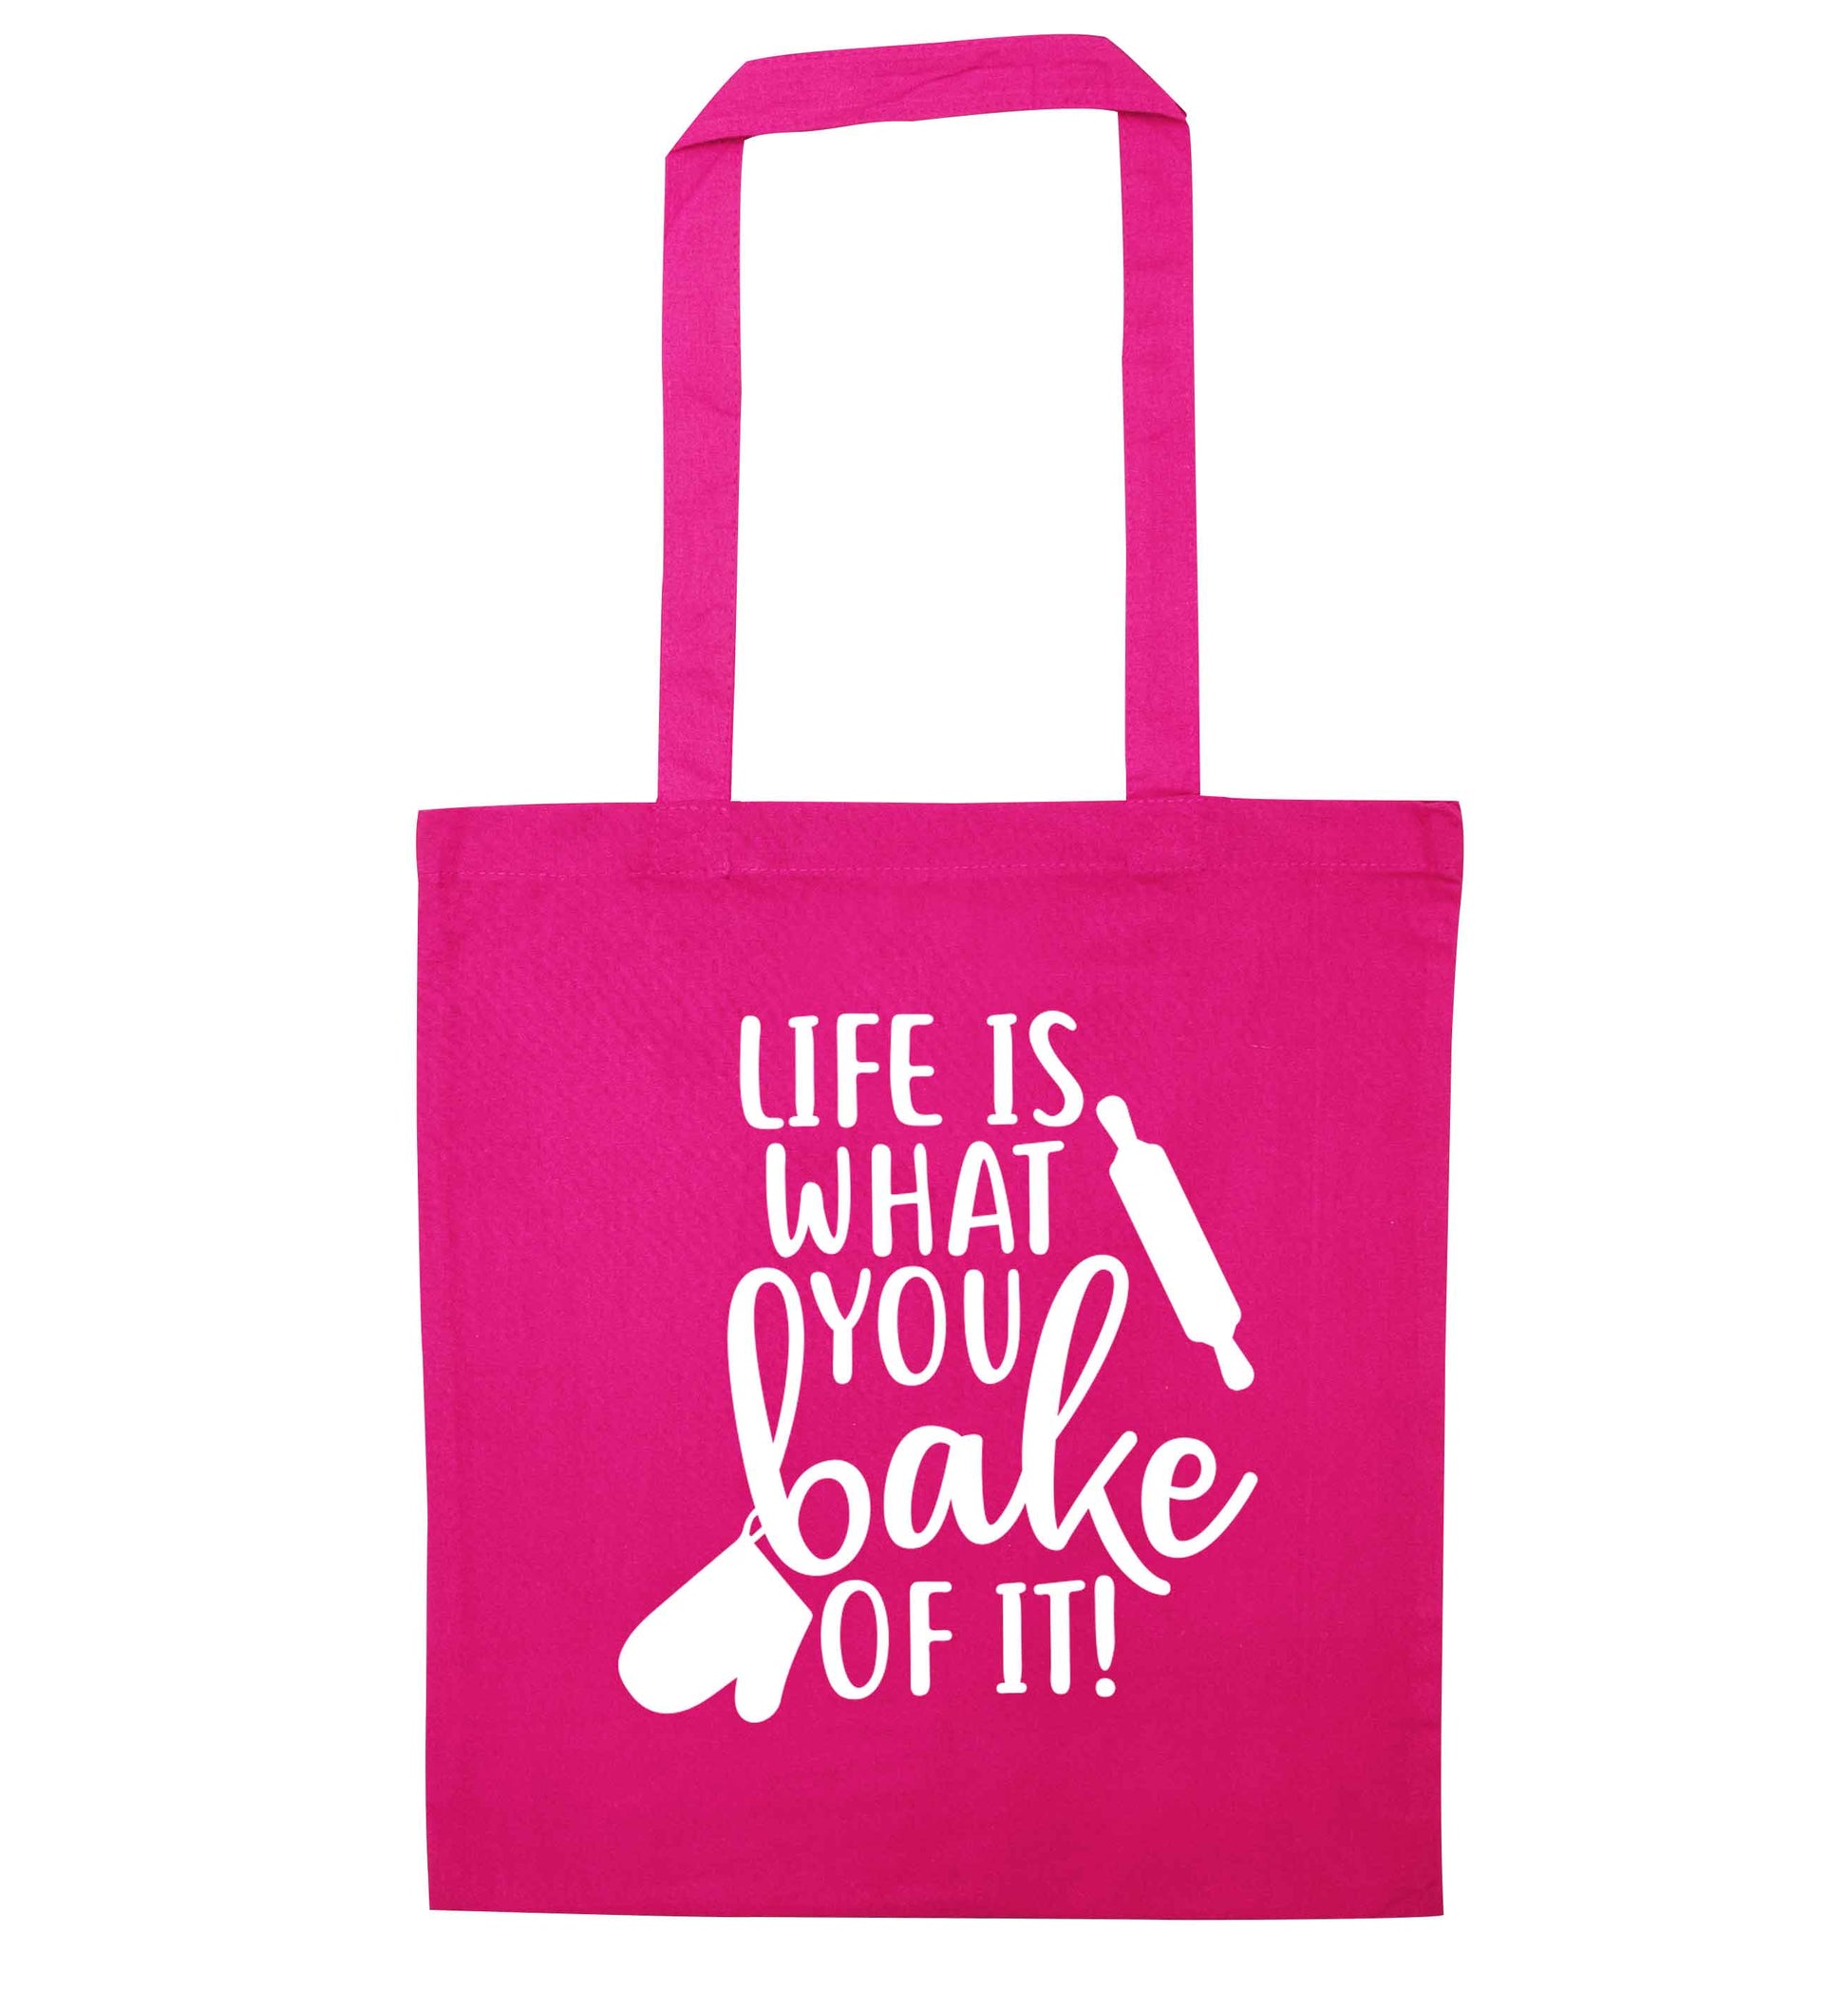 Life is what you bake of it pink tote bag